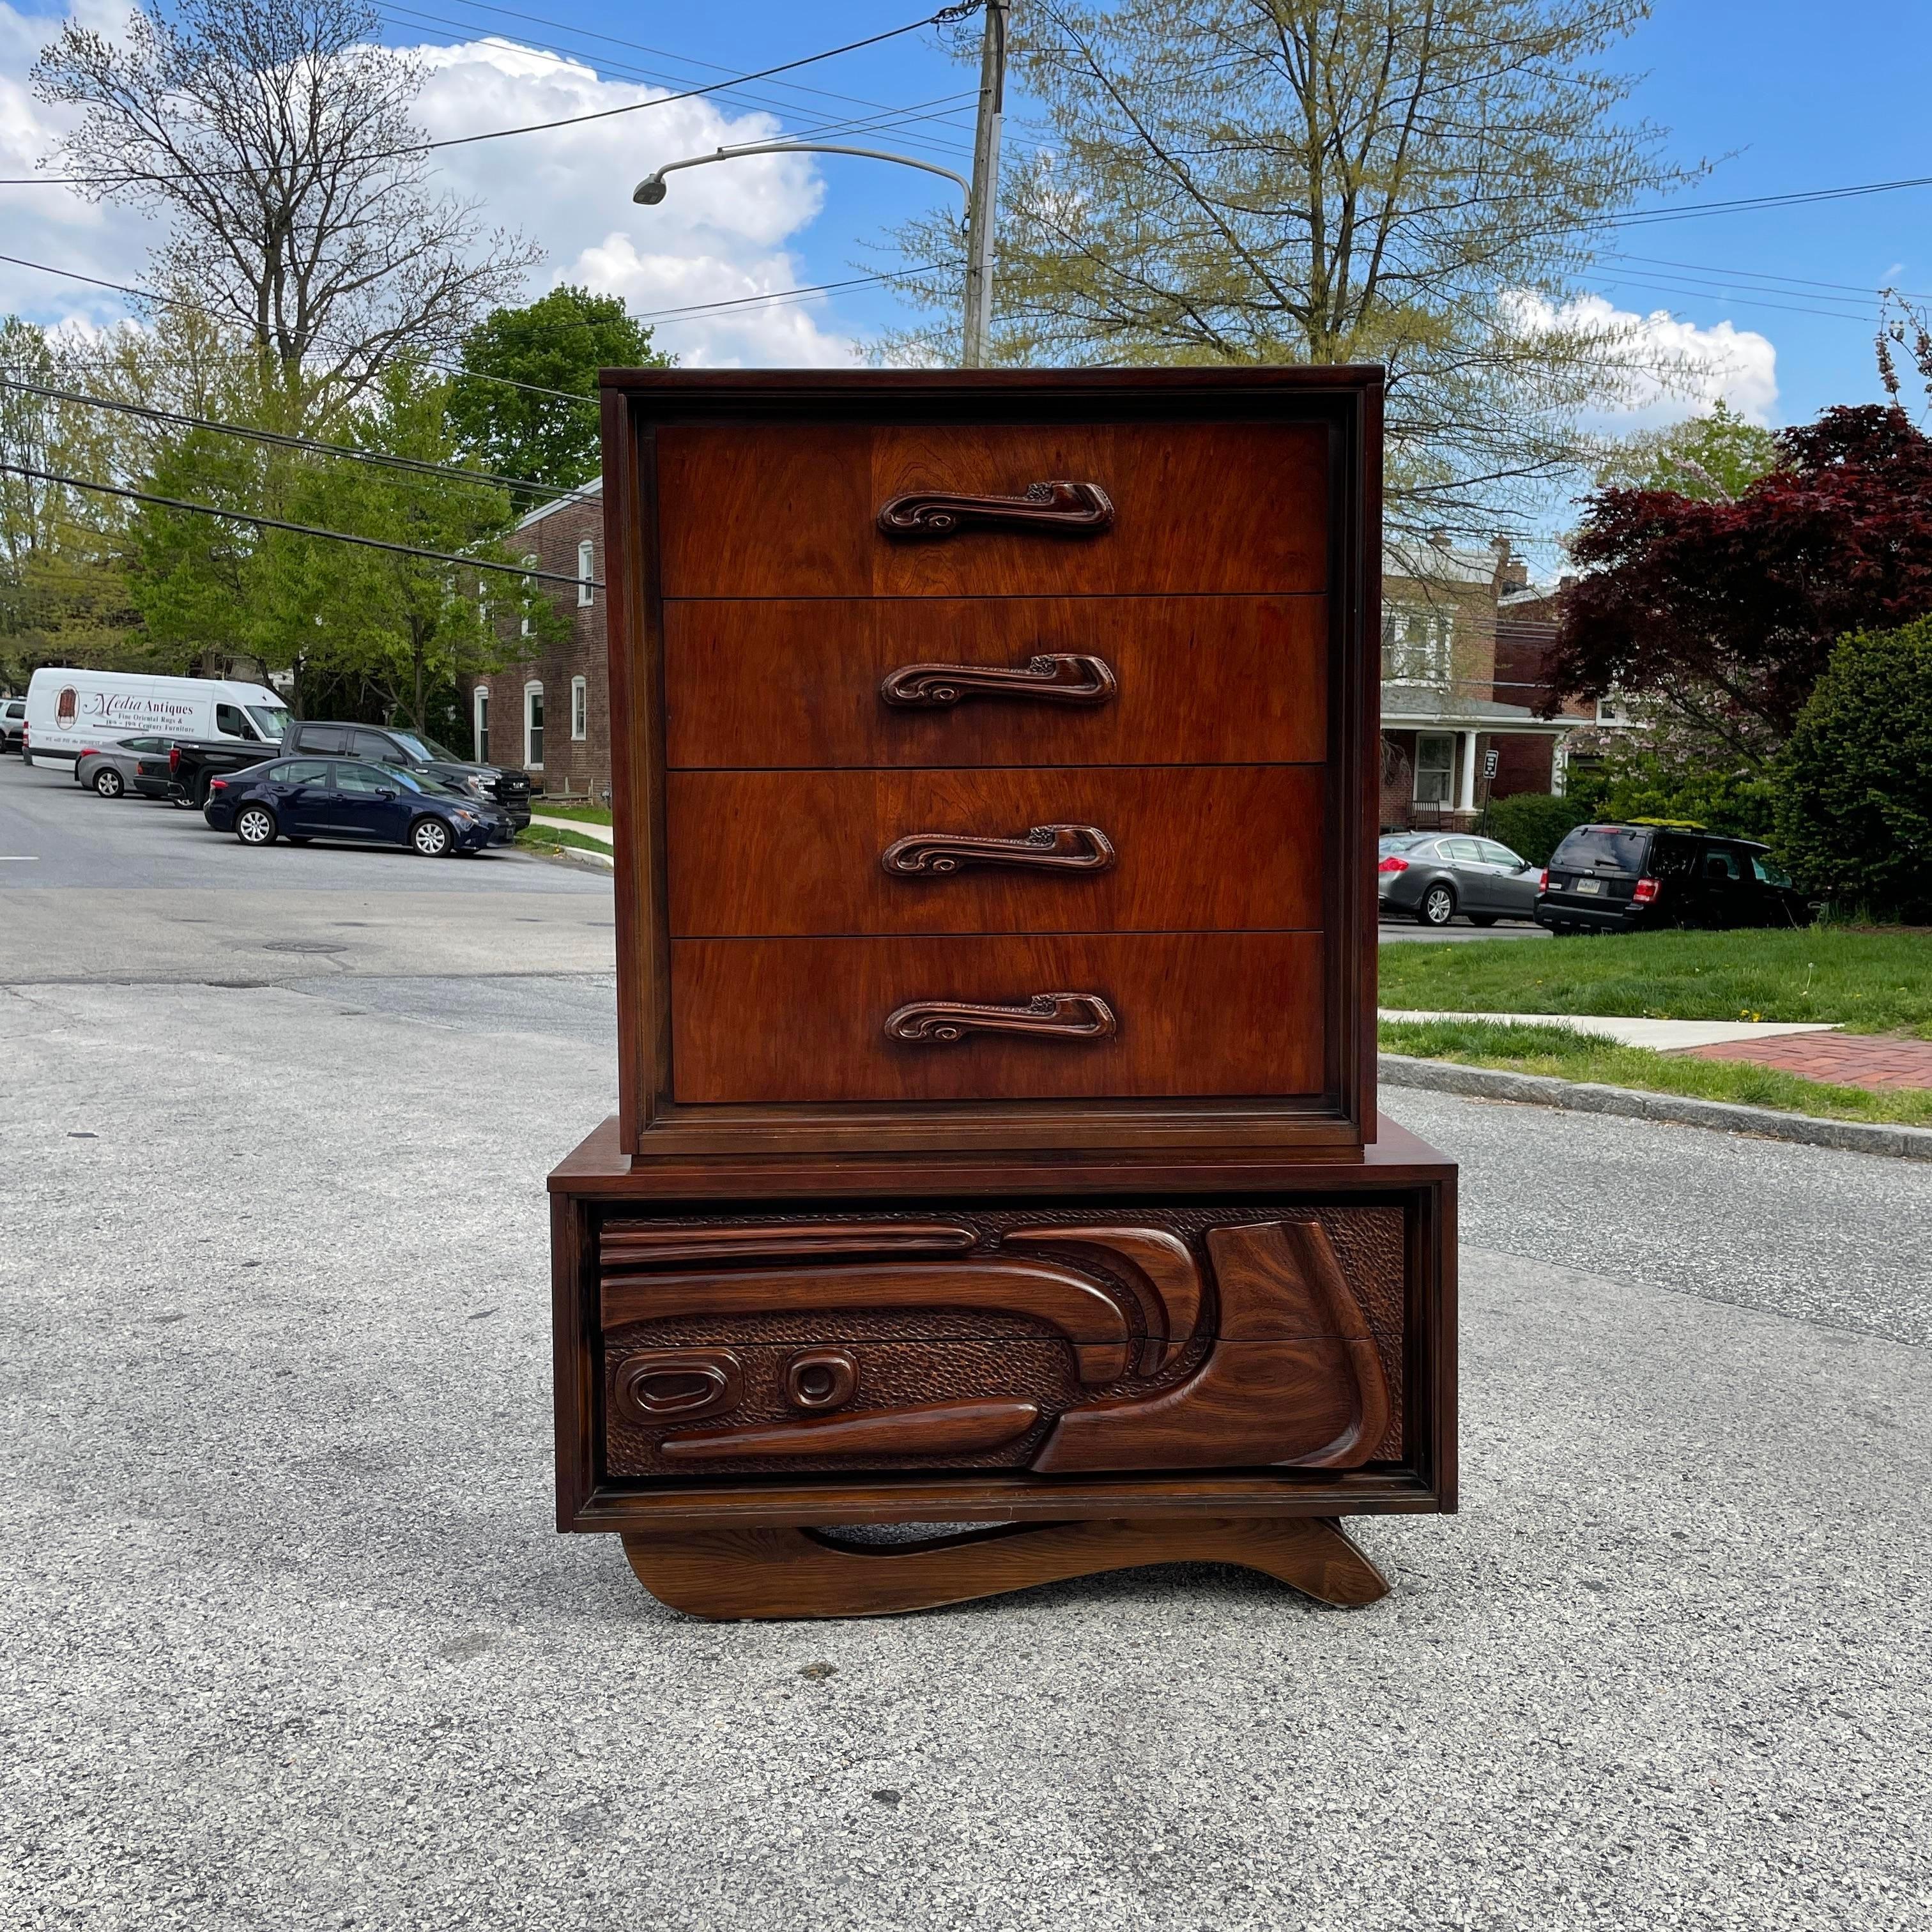 An iconic mid-century “Oceanic” dresser by Pulaski. This piece has six spacious drawers with sculpted fronts.